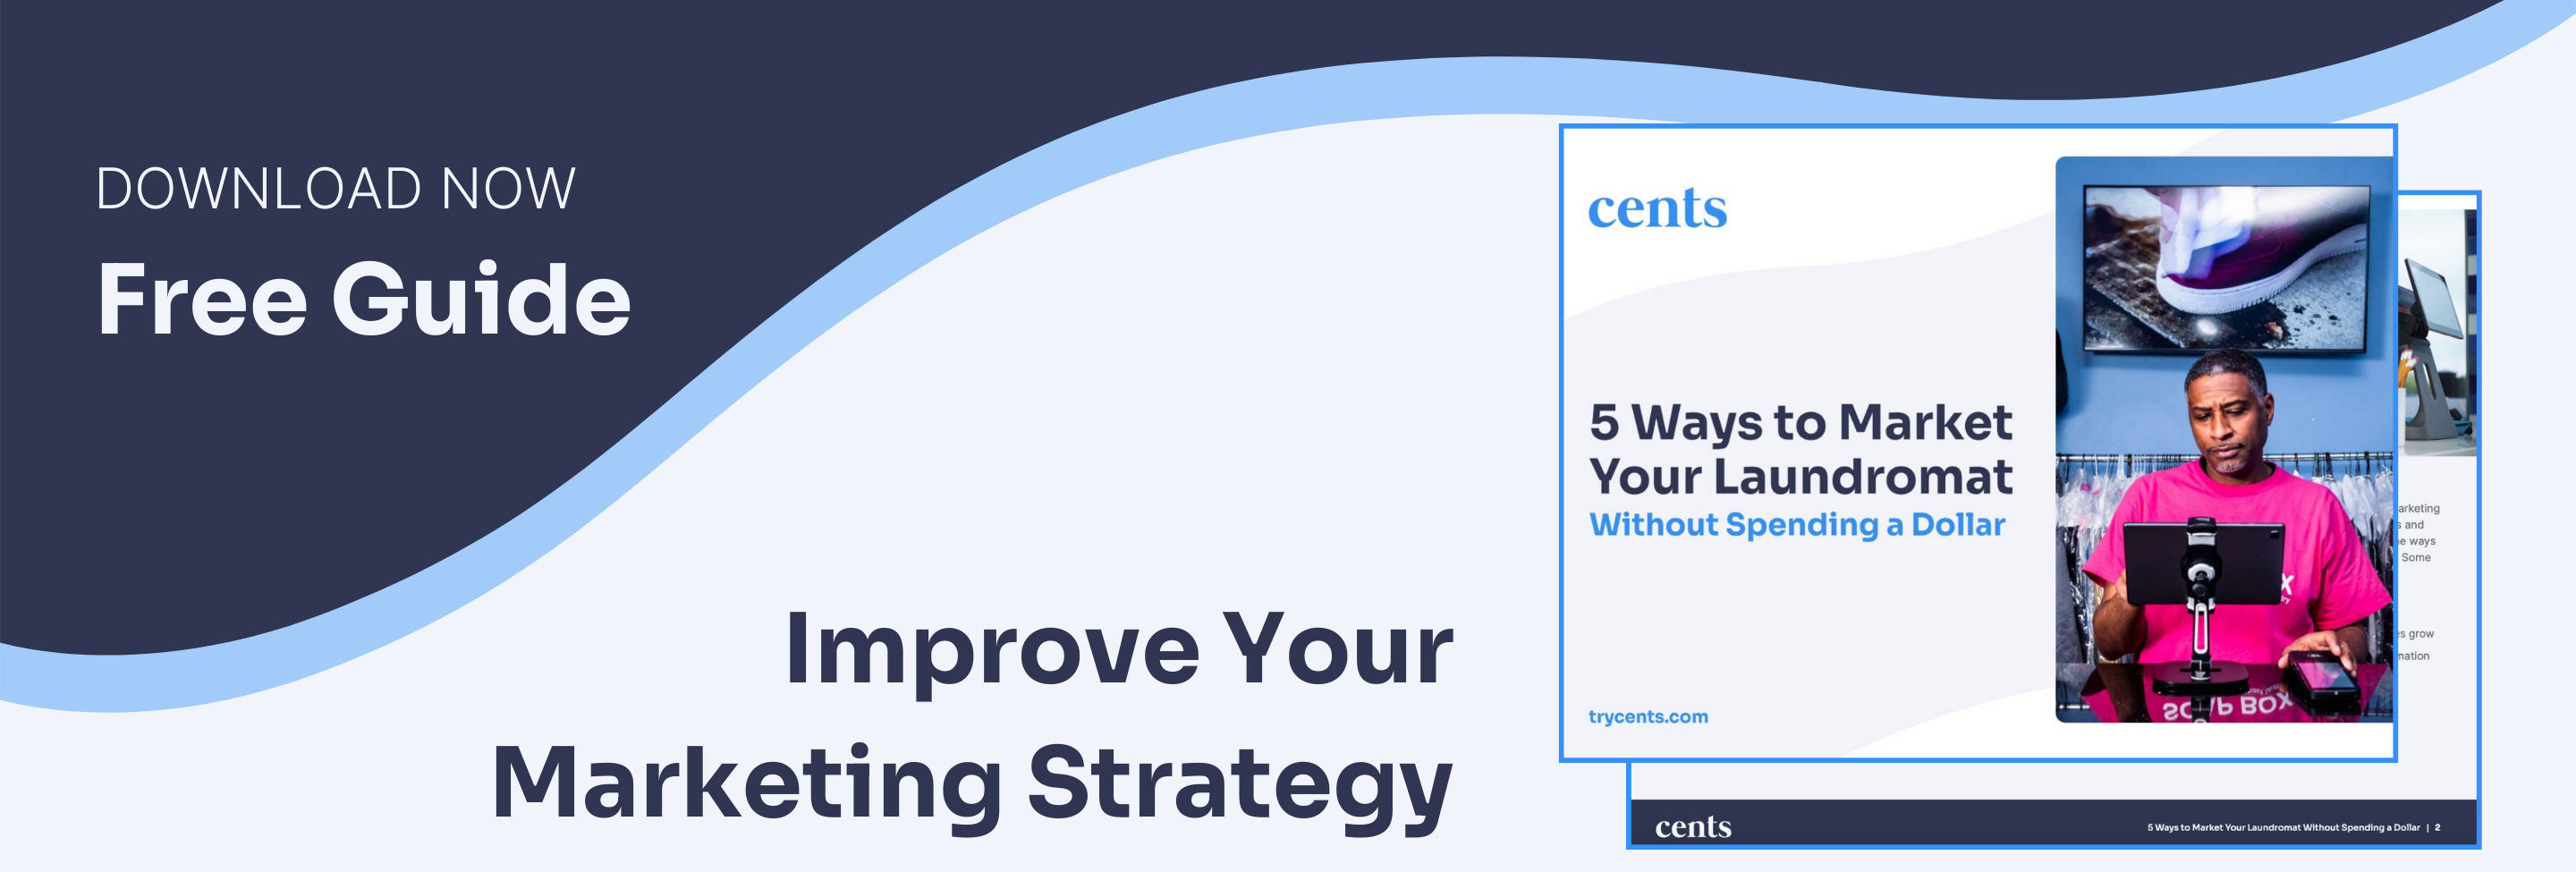 Content Download CTA - 5 ways to Improve your Marketing Strategy